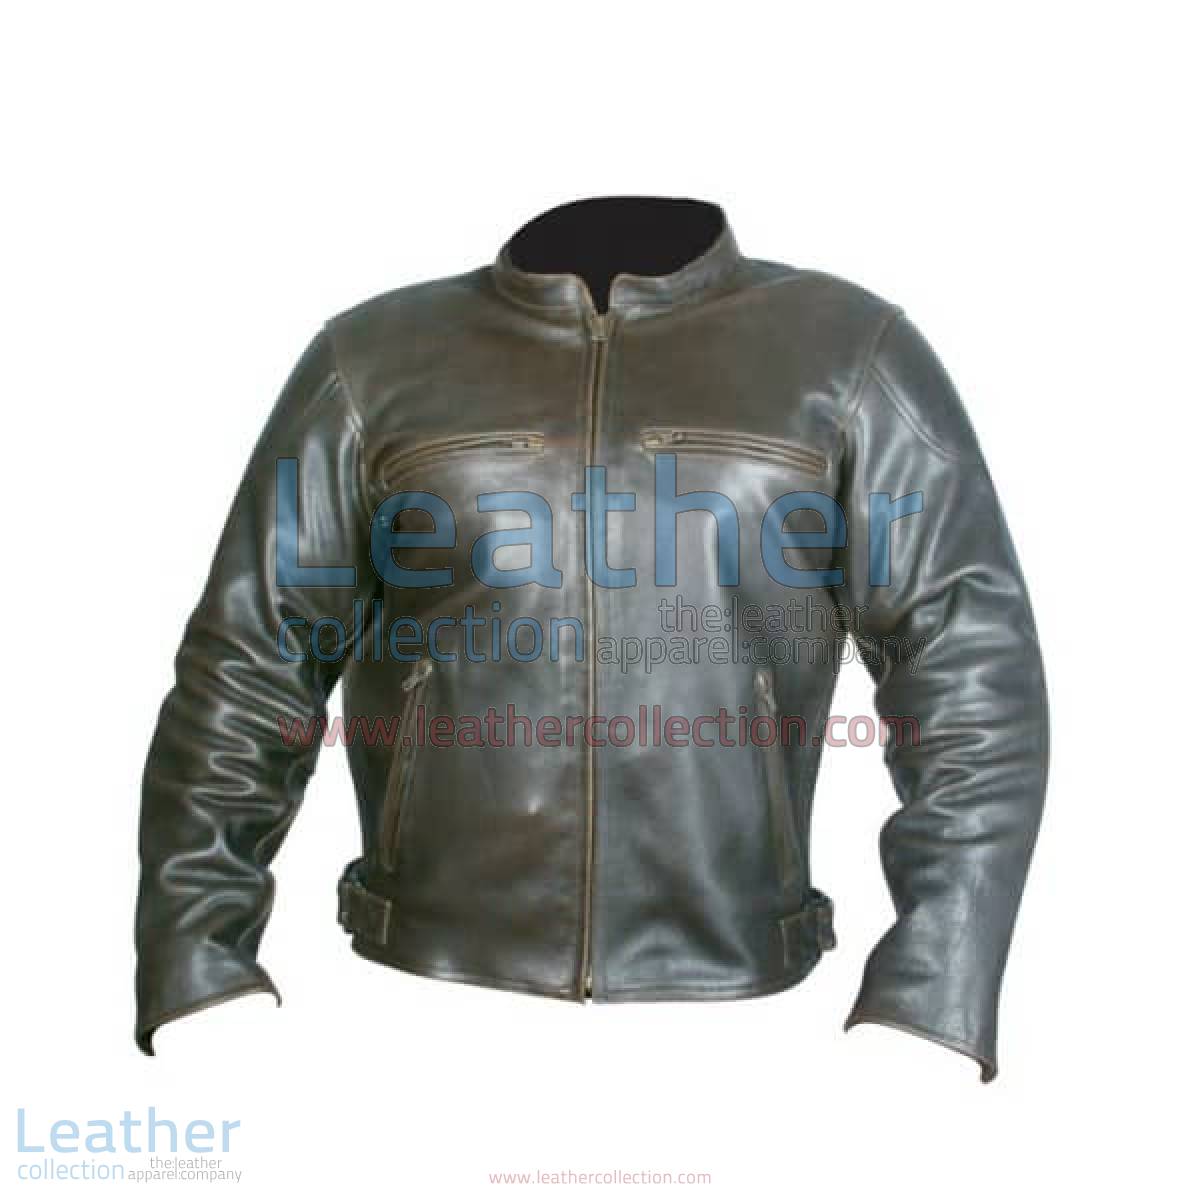 Retro Brown Leather Jacket | brown leather jacket,retro brown leather jacket